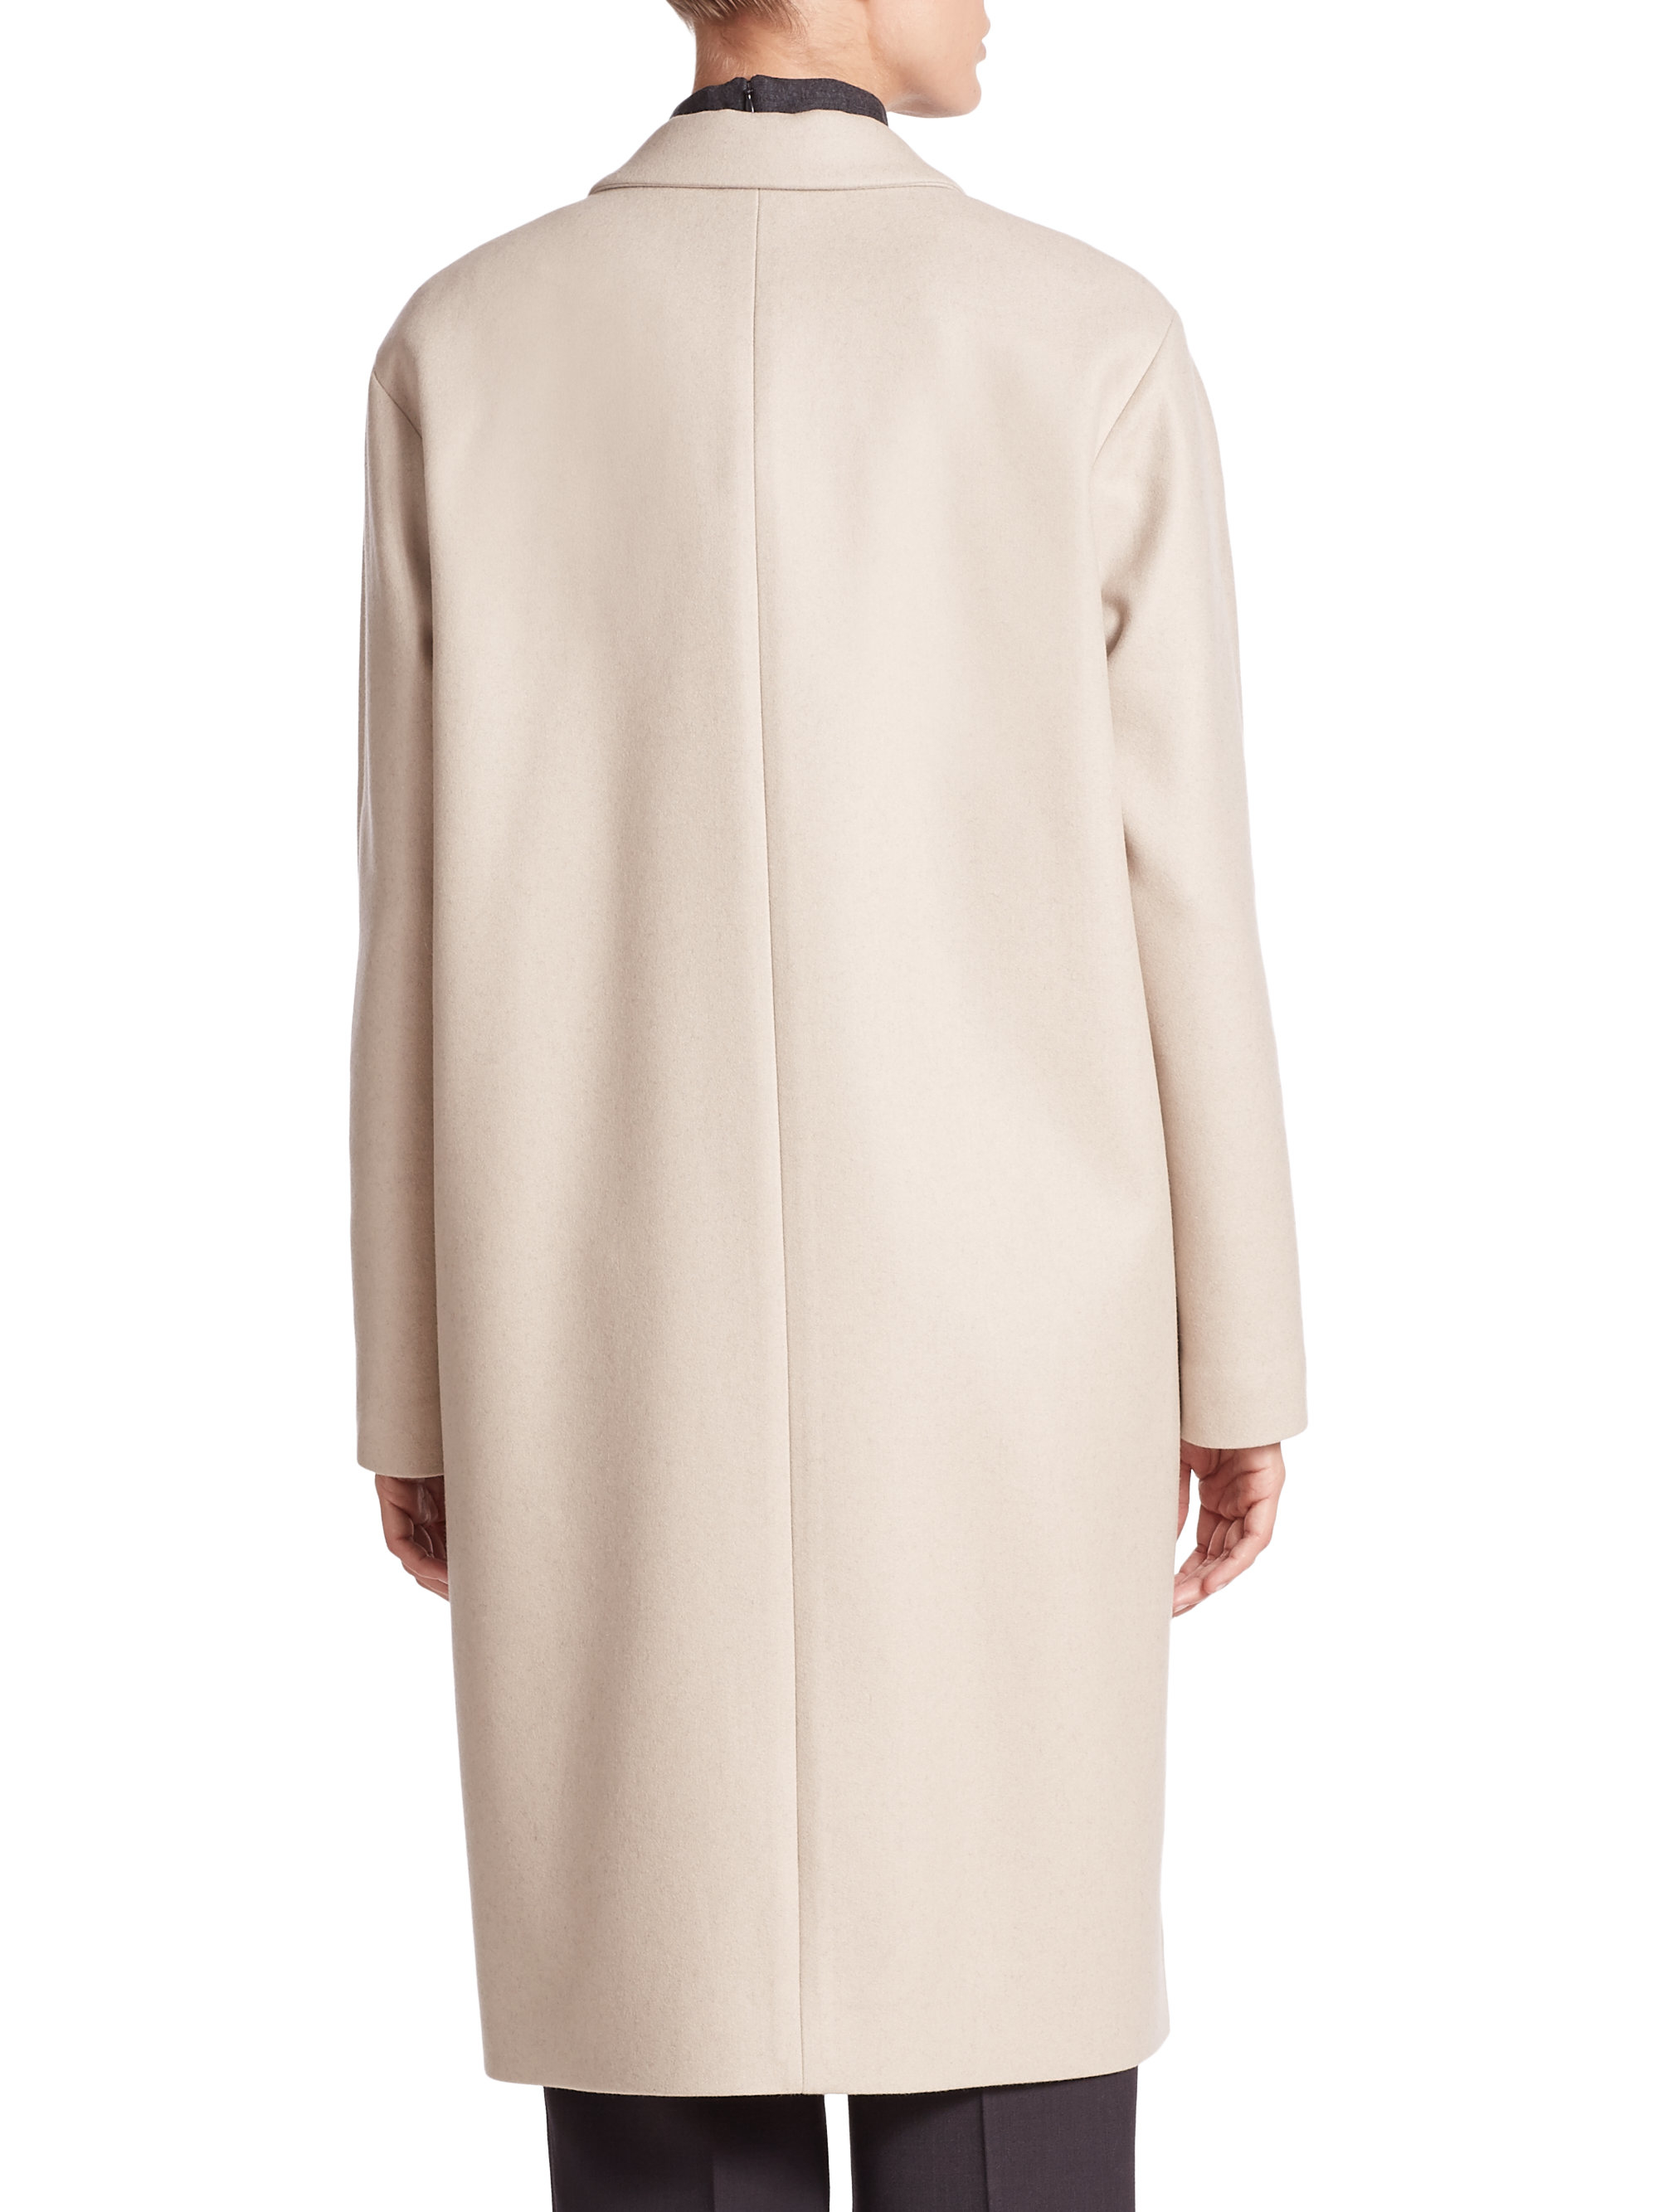 Brunello Cucinelli Double-faced Cashmere Coat in Natural | Lyst